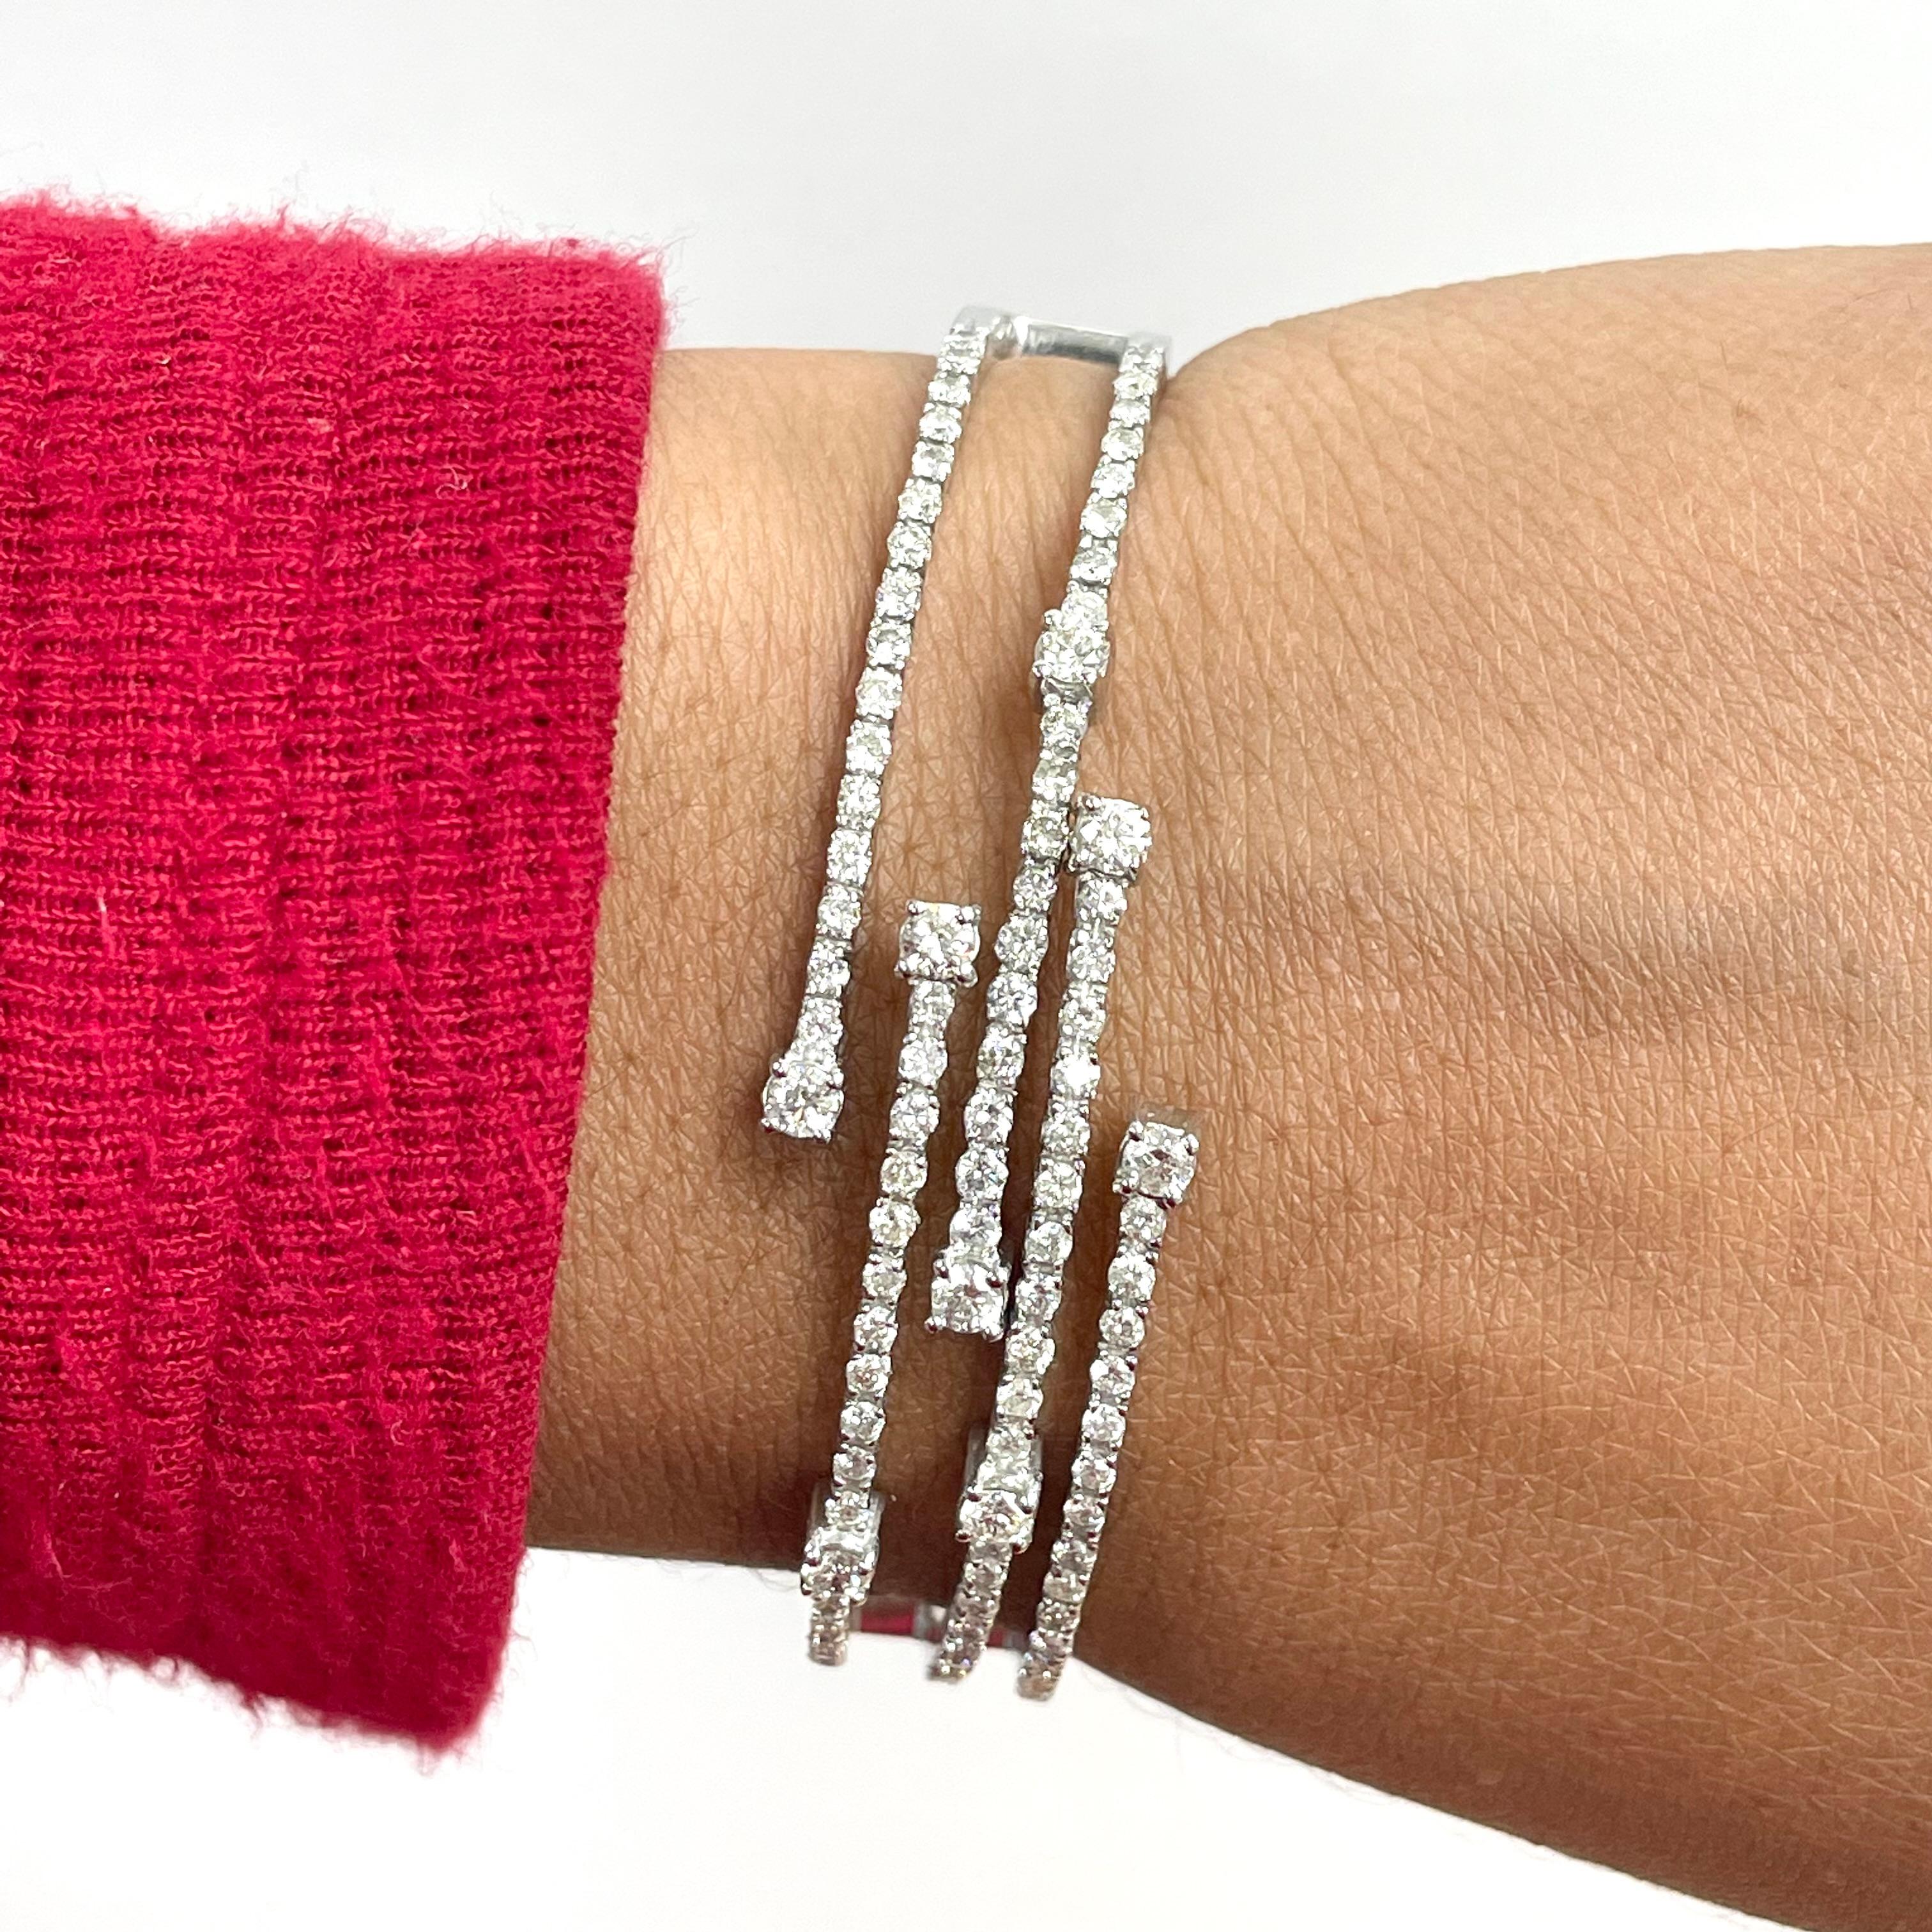 The Krisha bangle is a perfect modern jewel to adorn the wrist. With strands of diamonds closing to embrace the wrist and larger diamonds popping in places, its a timeless statement jewel.

Diamonds Shapes: Round 
Side Diamonds Weight: 2.45 ct 
Side